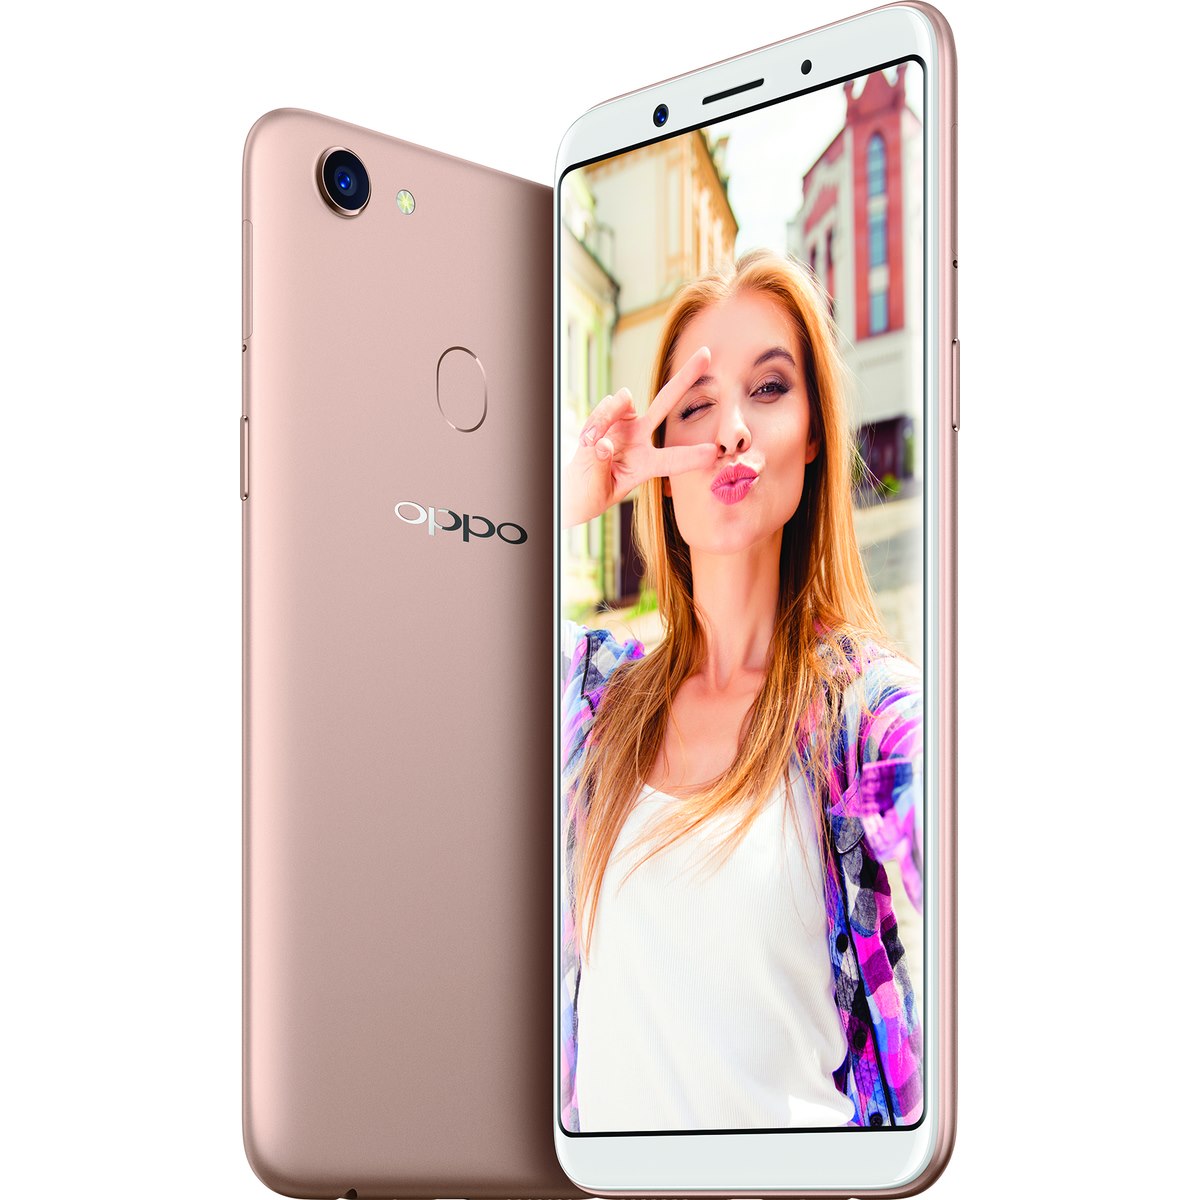 Copy of OPPO A73 (Gold) Mobile Phone